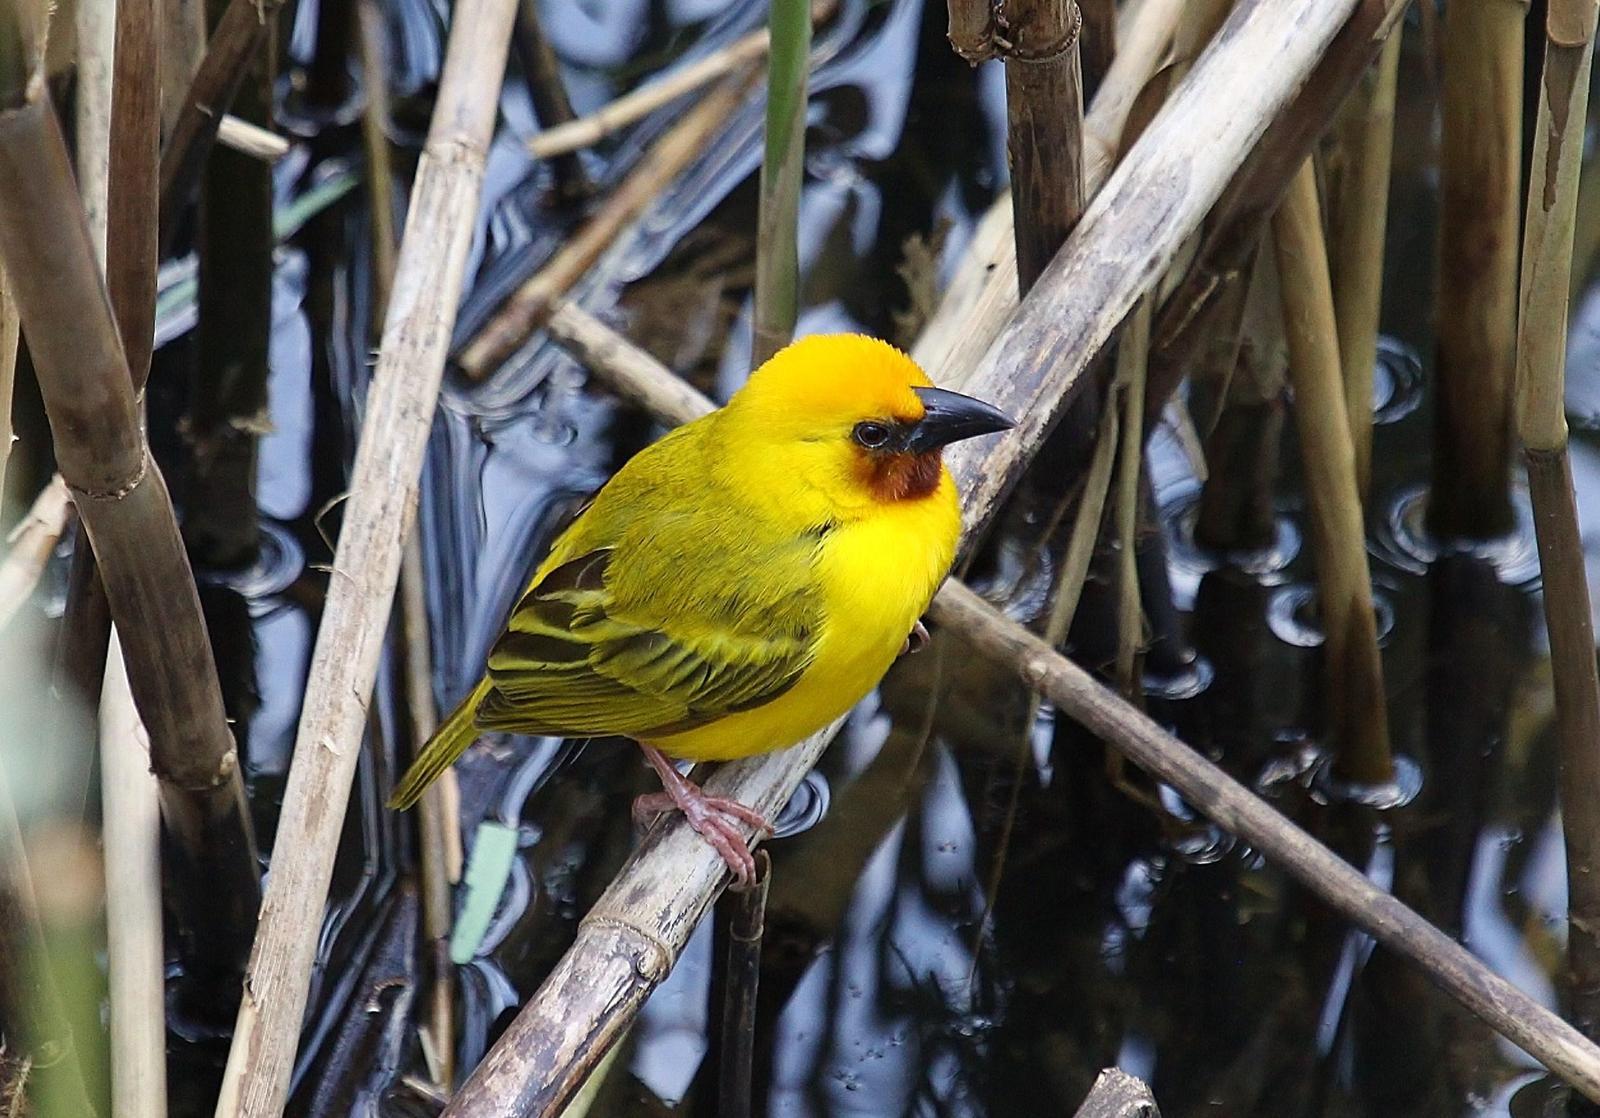 Southern Brown-throated Weaver Photo by Matthew McCluskey